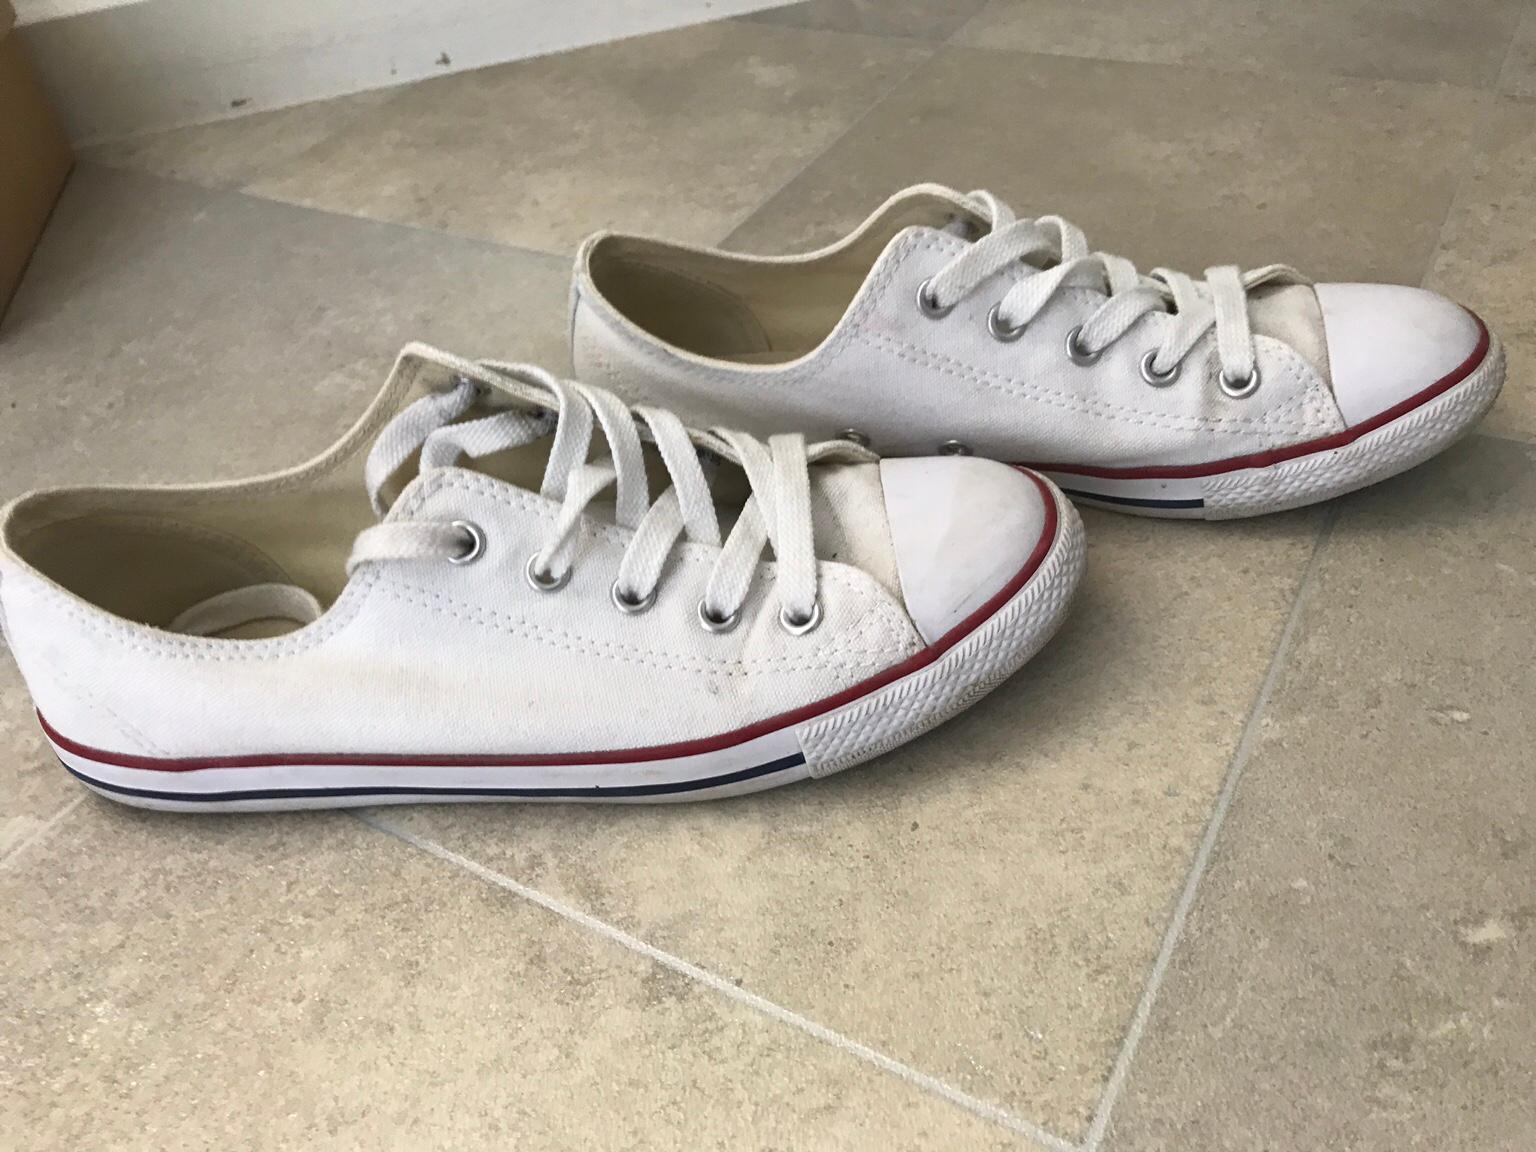 converse all star white size 4